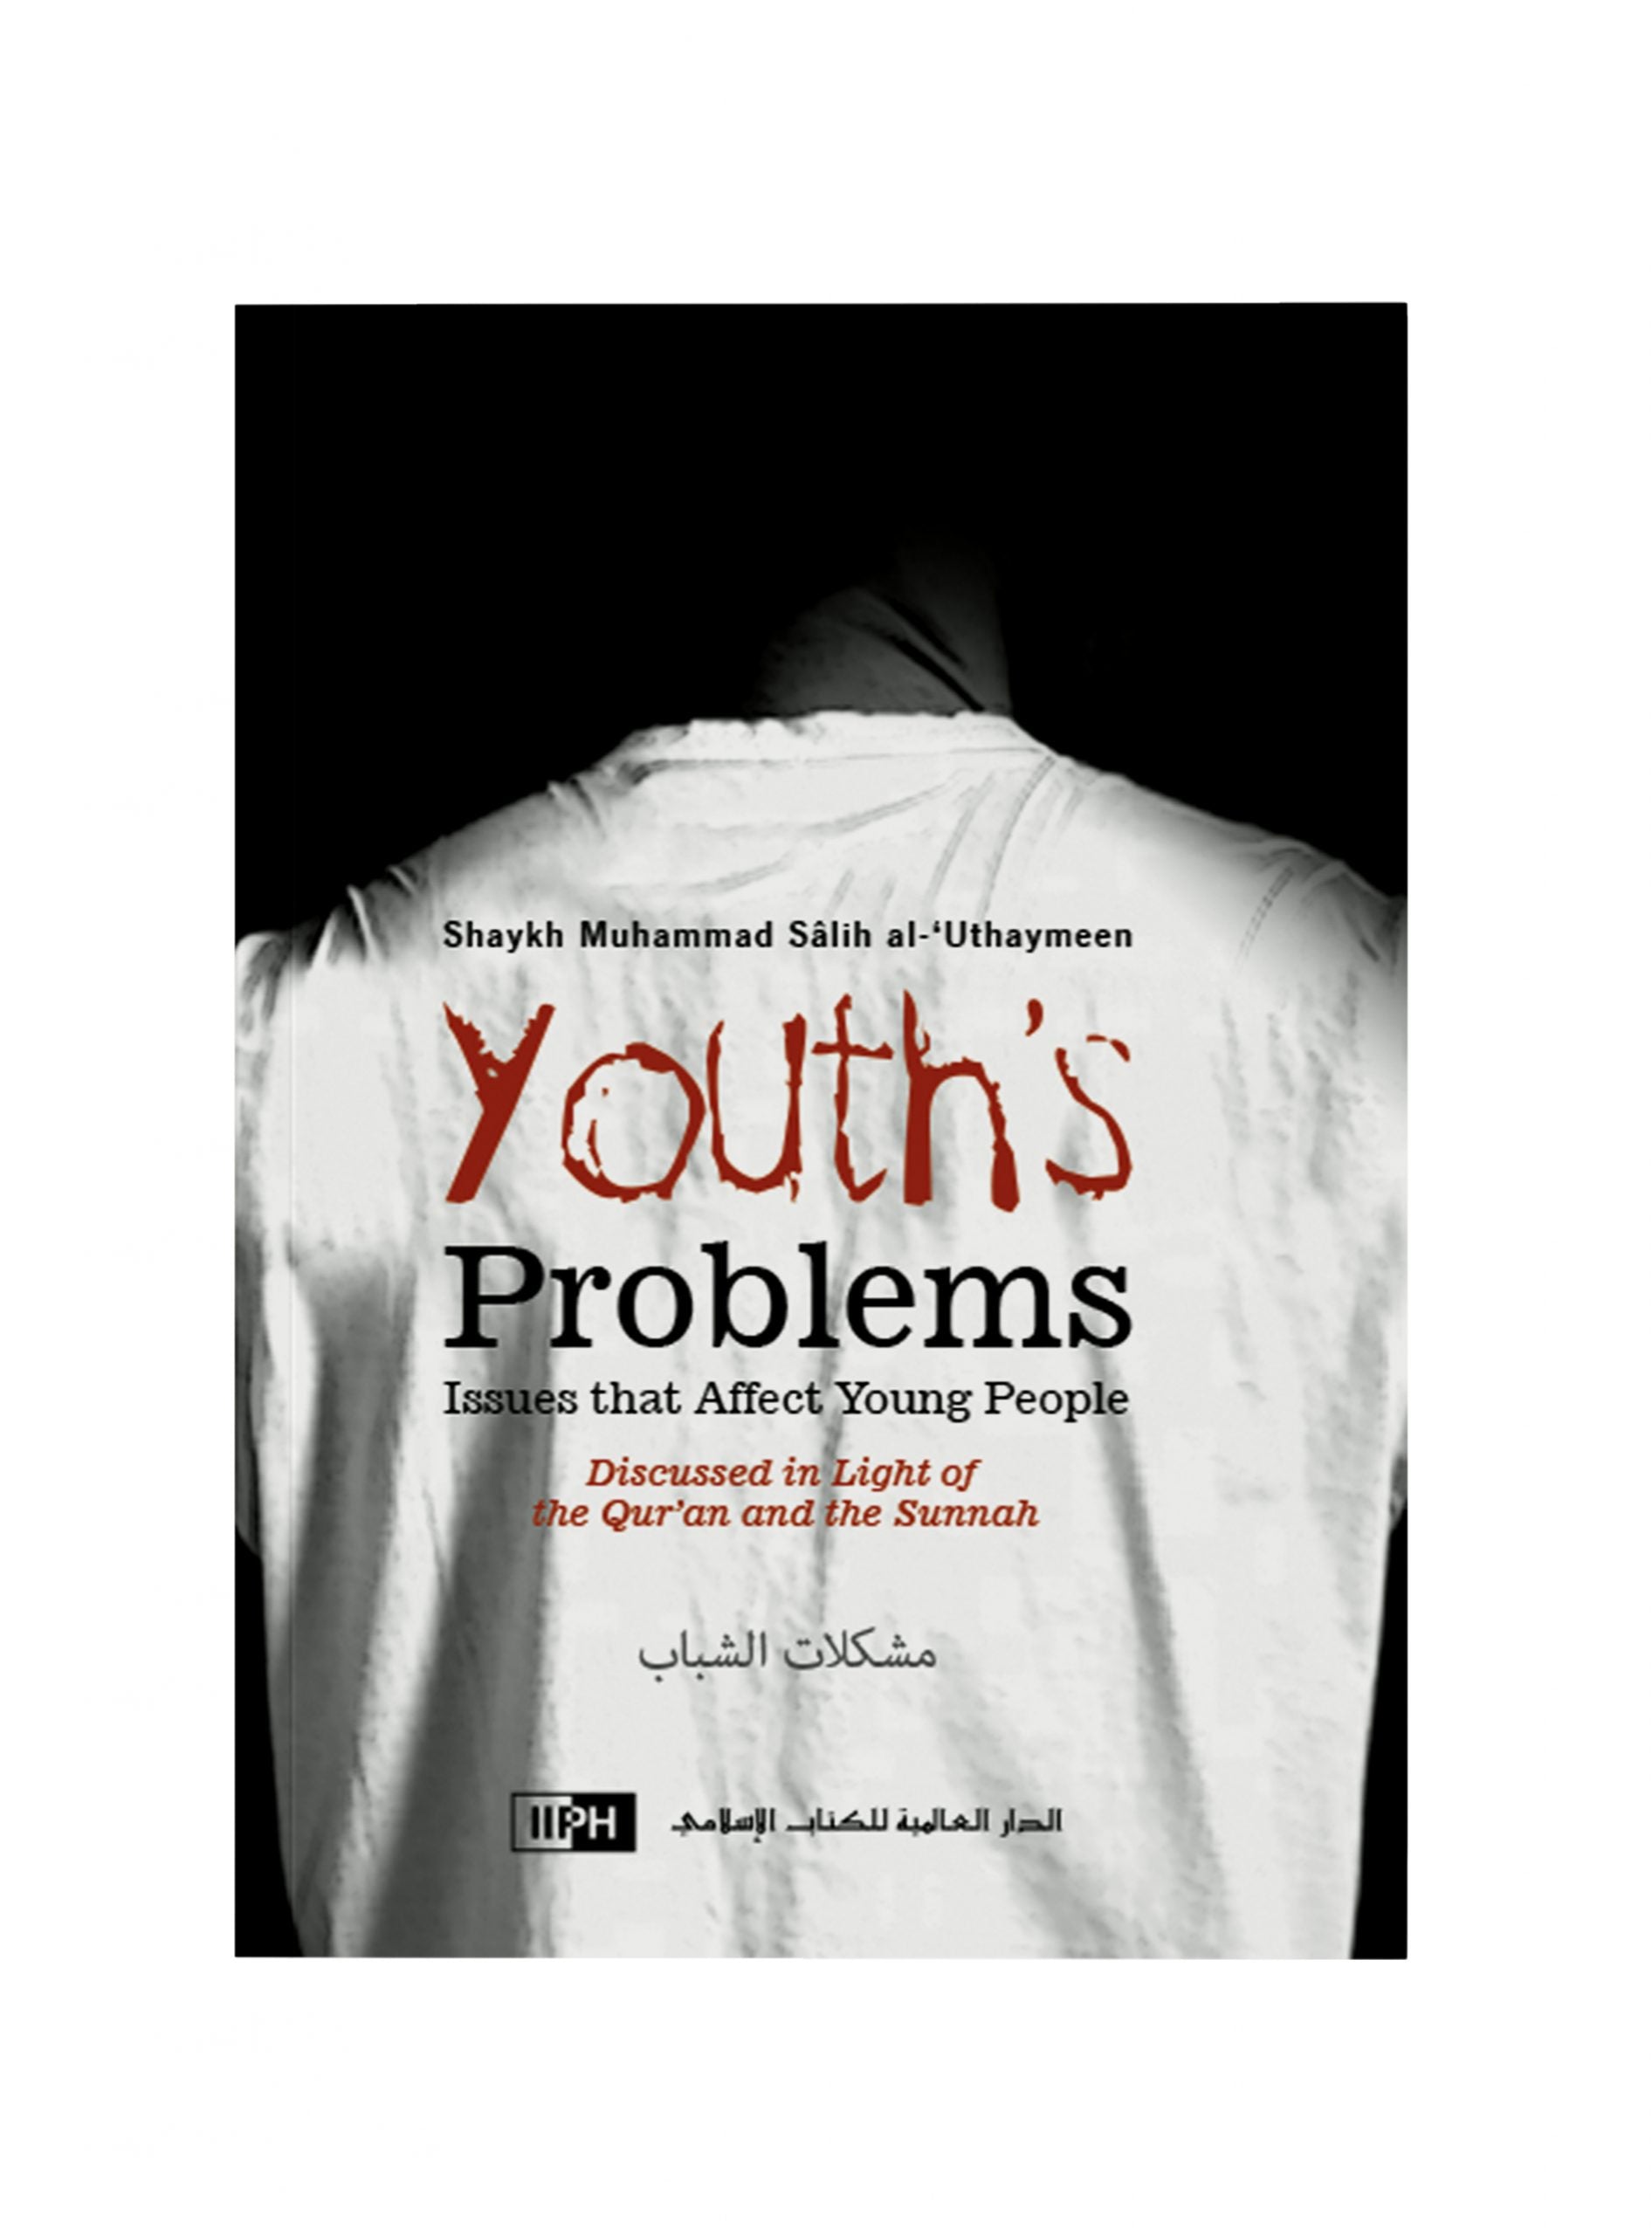 Youth’s Problems: Issues that Affect Young People